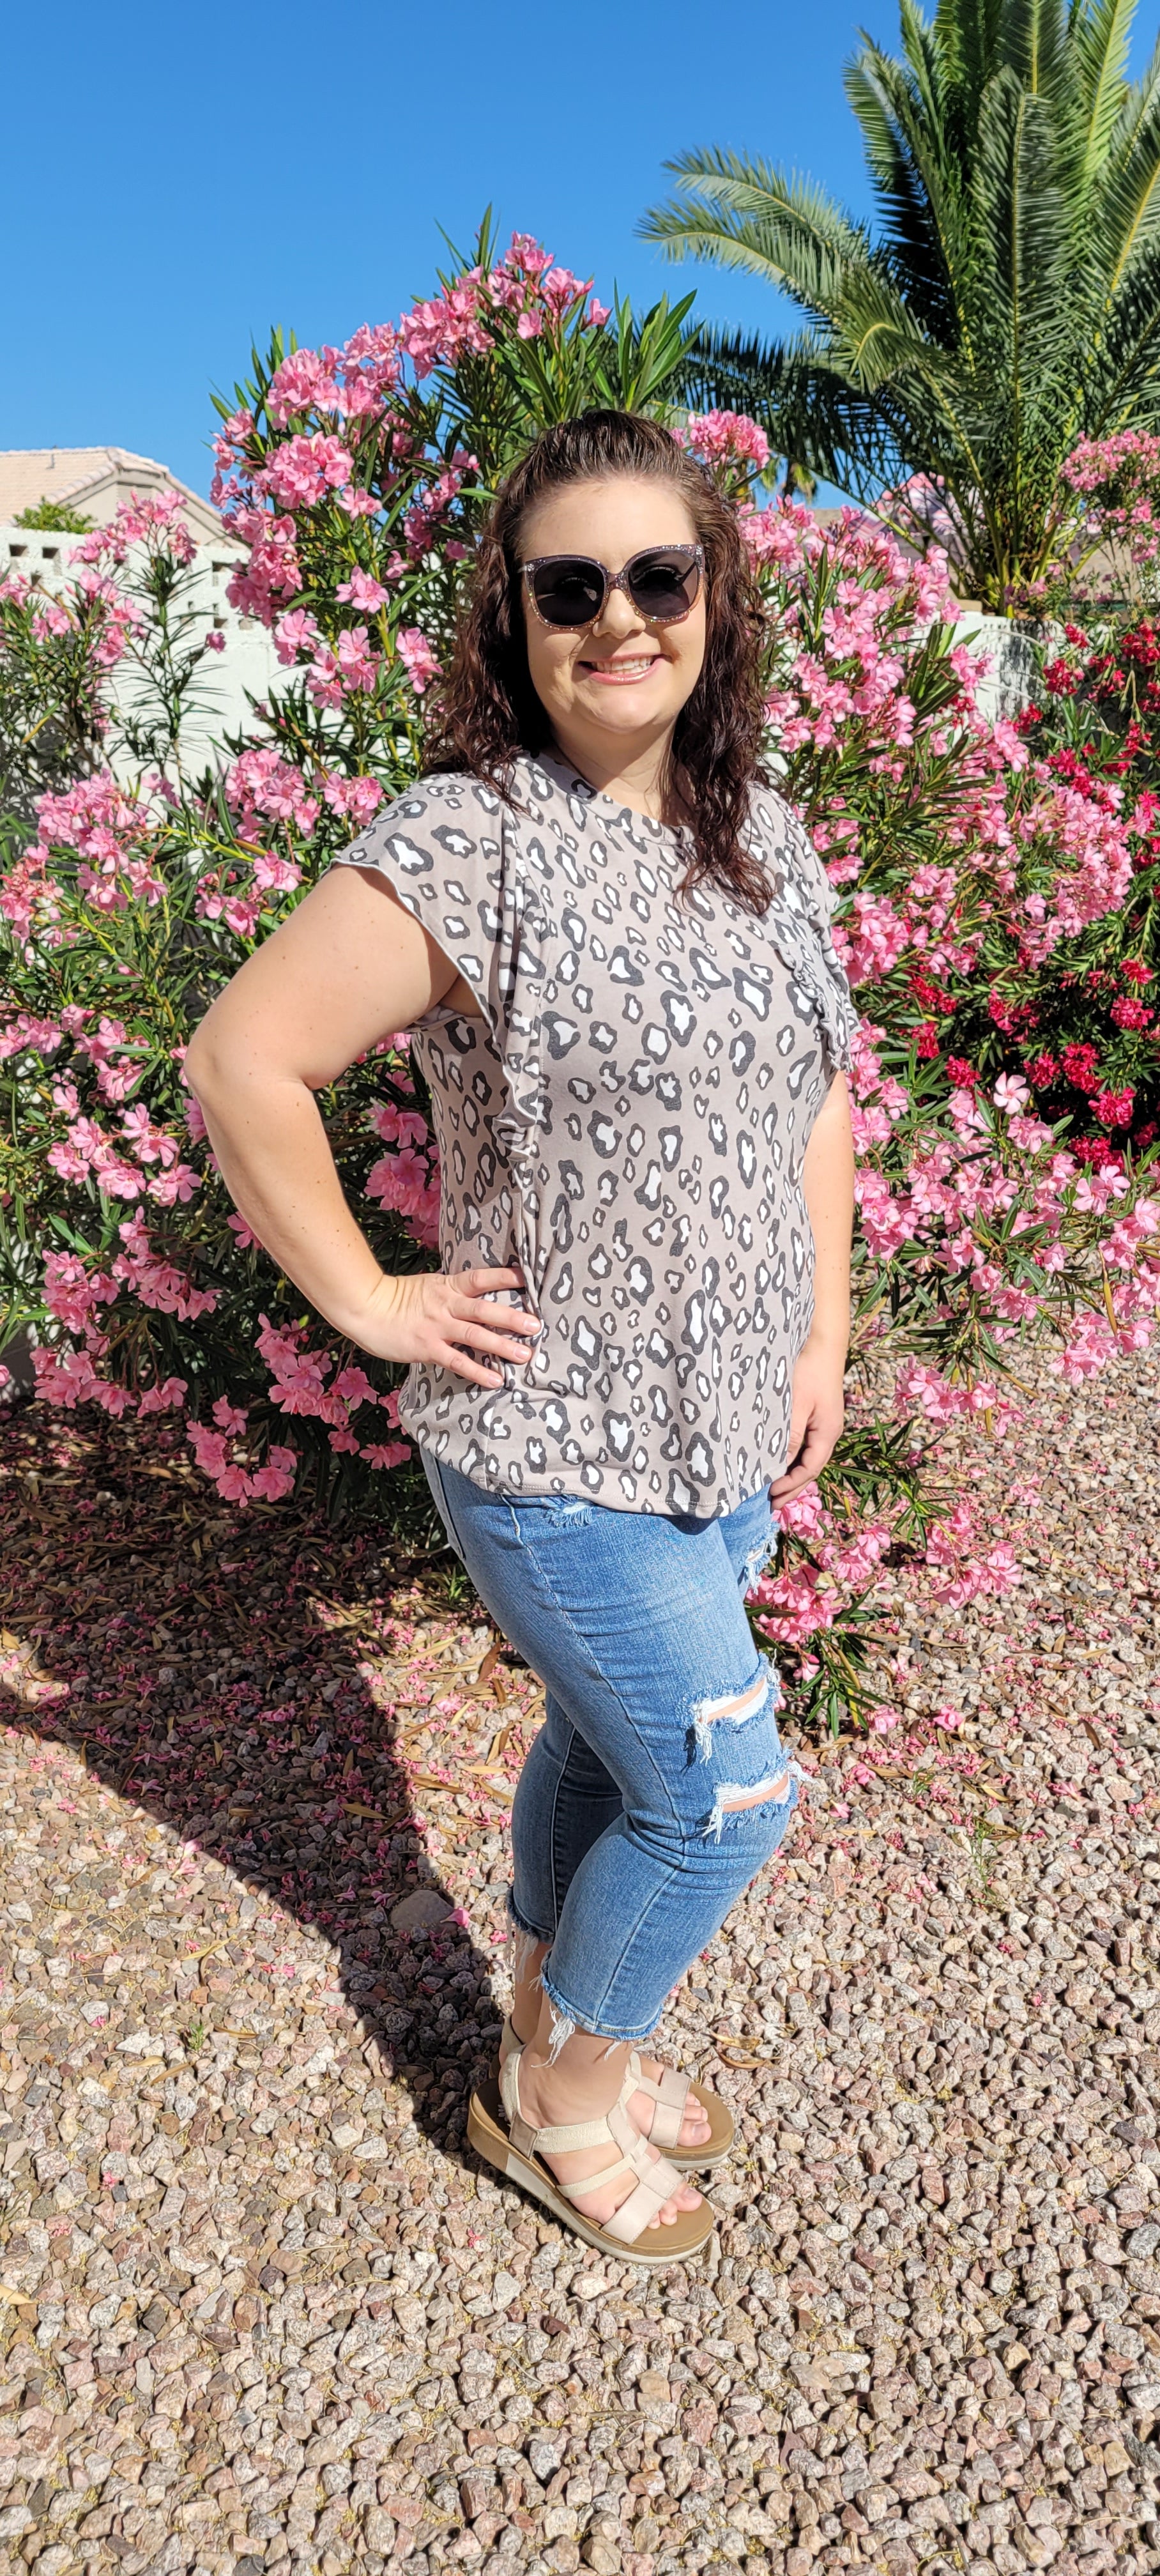 “Fearless” top features a rounded neckline, ruffled short sleeves, ruffled chest pocket, with taupe, white, and gray animal print. This top is great for vacation, those hot summer days, or a shopping day with your friends. Sizes small through large.